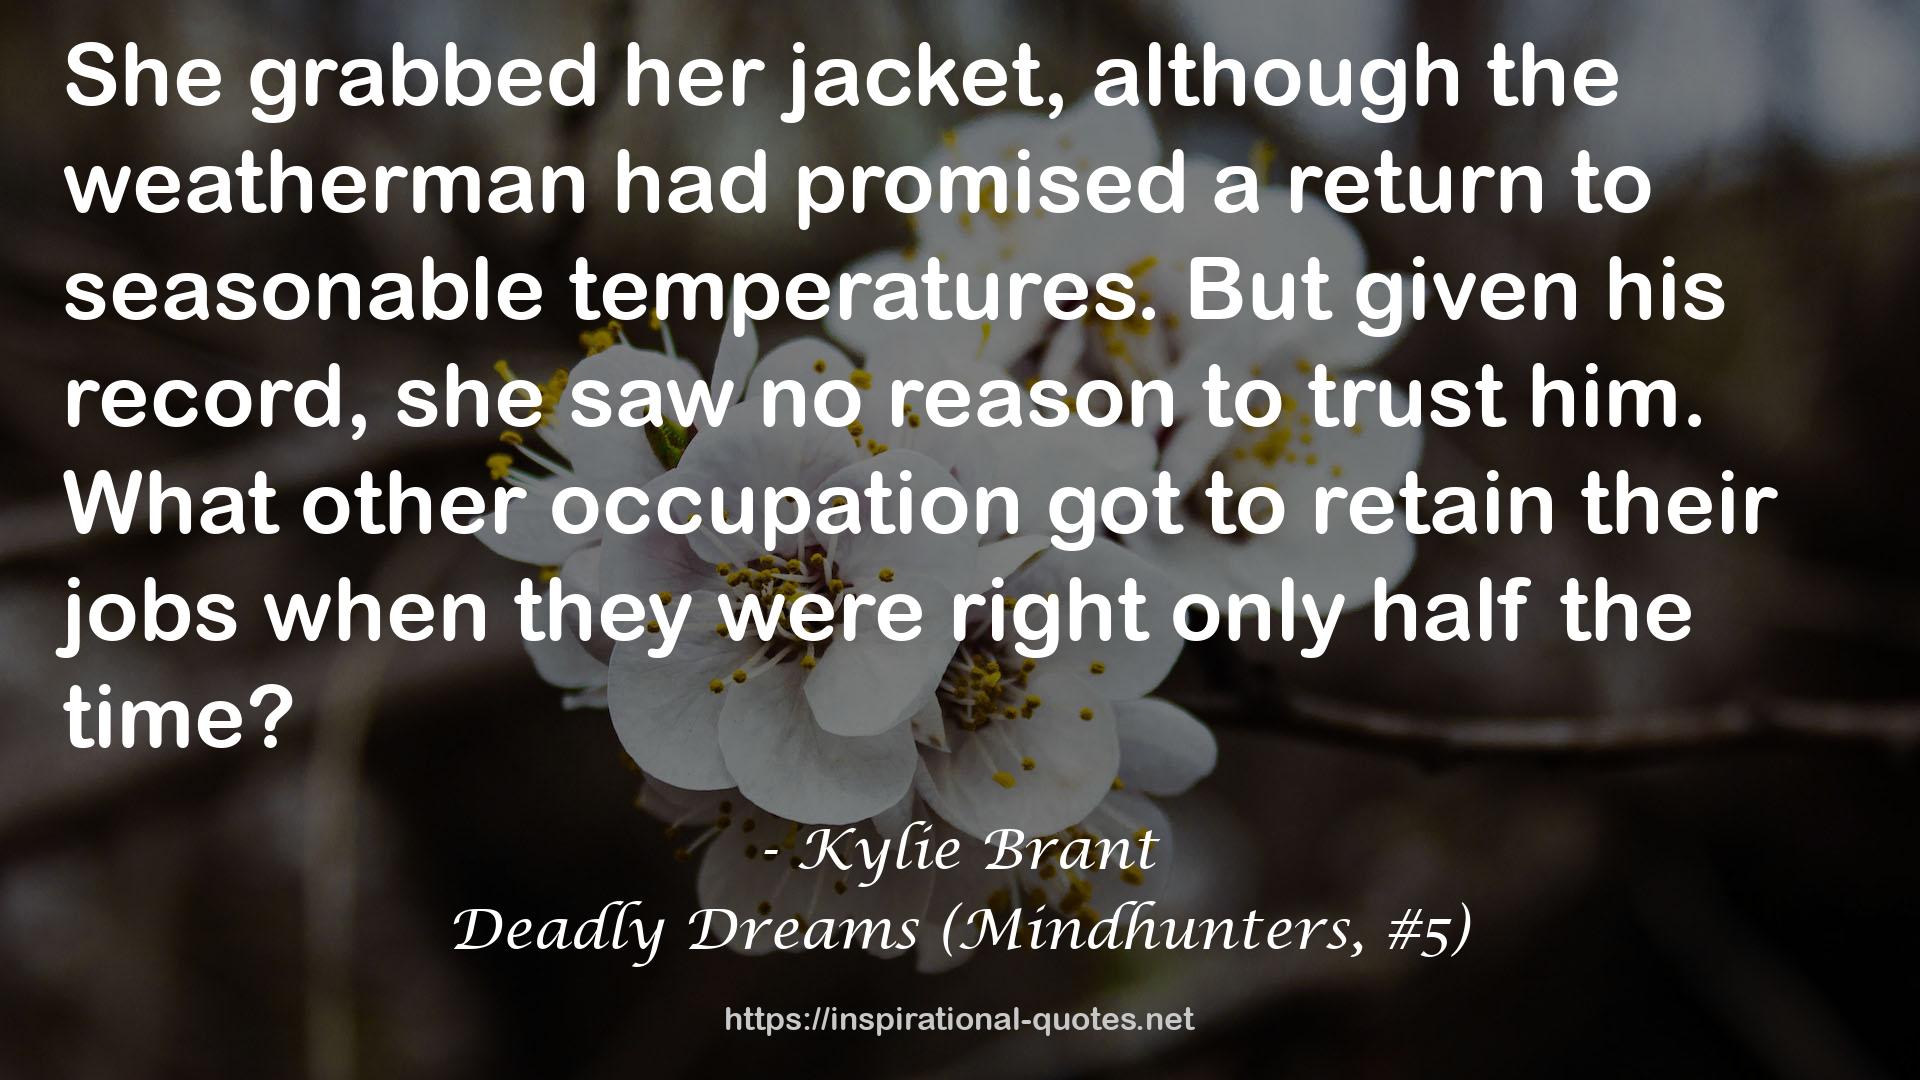 Deadly Dreams (Mindhunters, #5) QUOTES